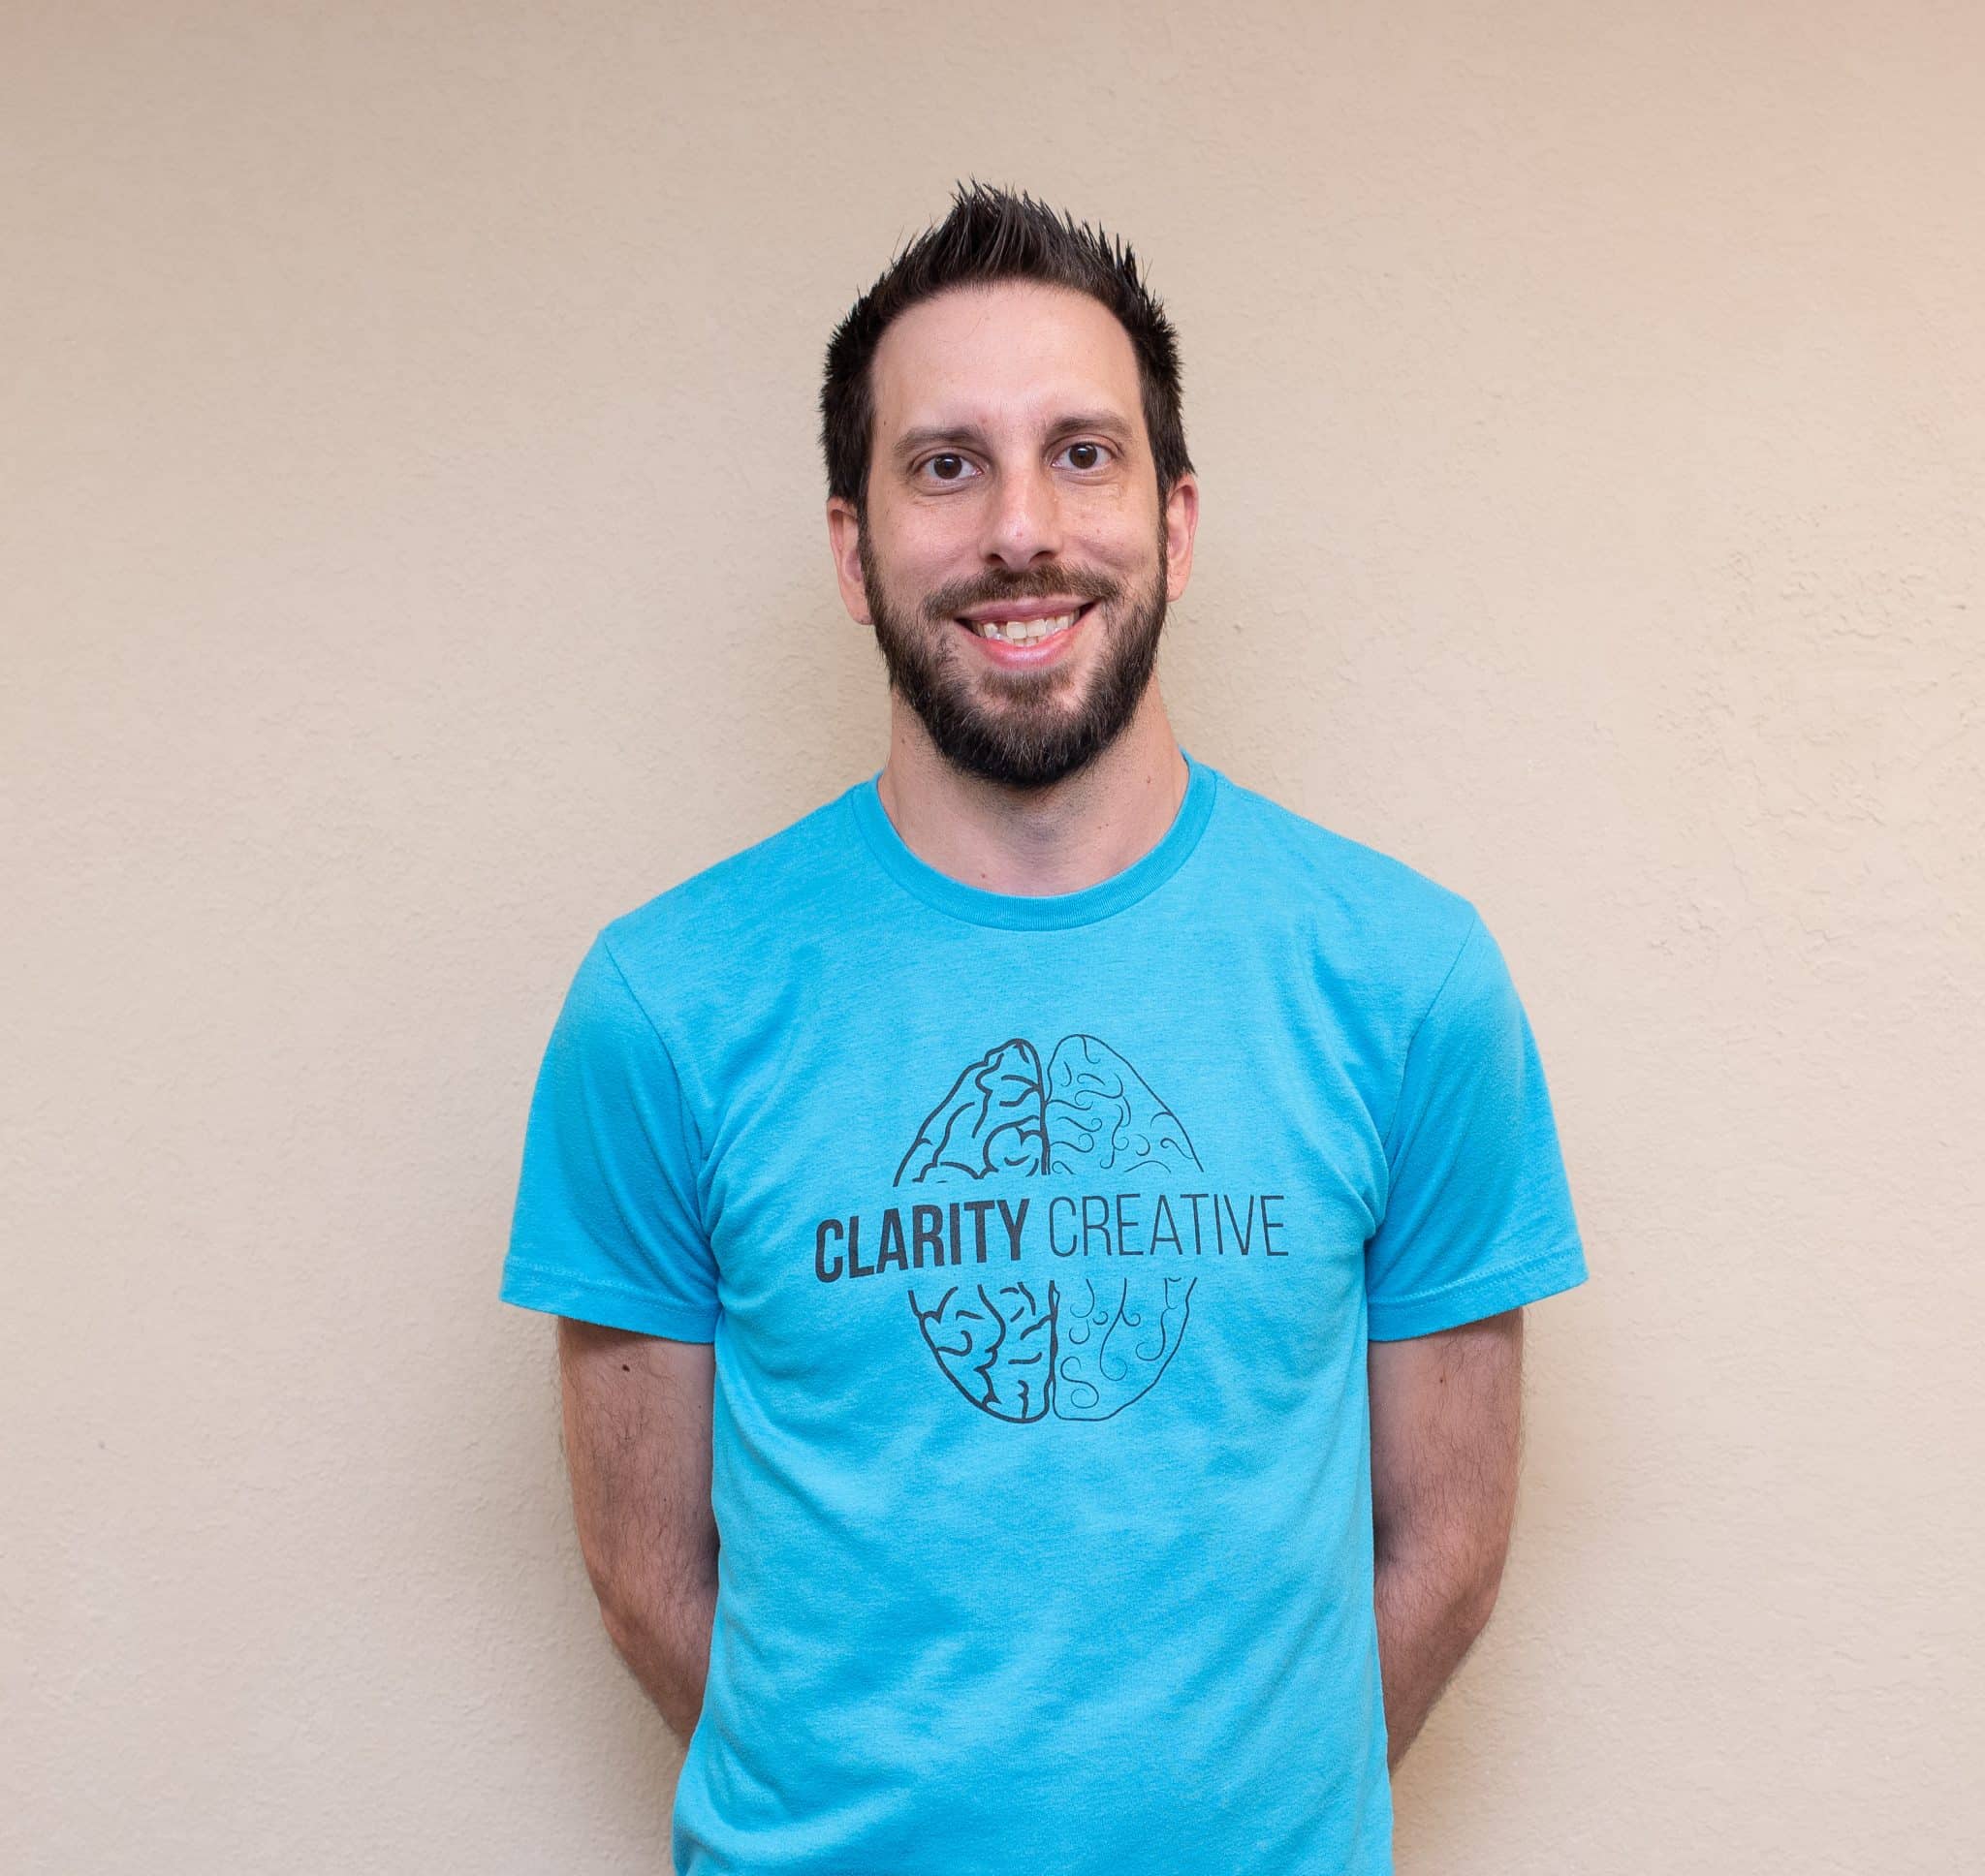 David of Clarity Creative Group. He is smiling, has a teal Clarity Creative shirt and sports a beard and mustache.